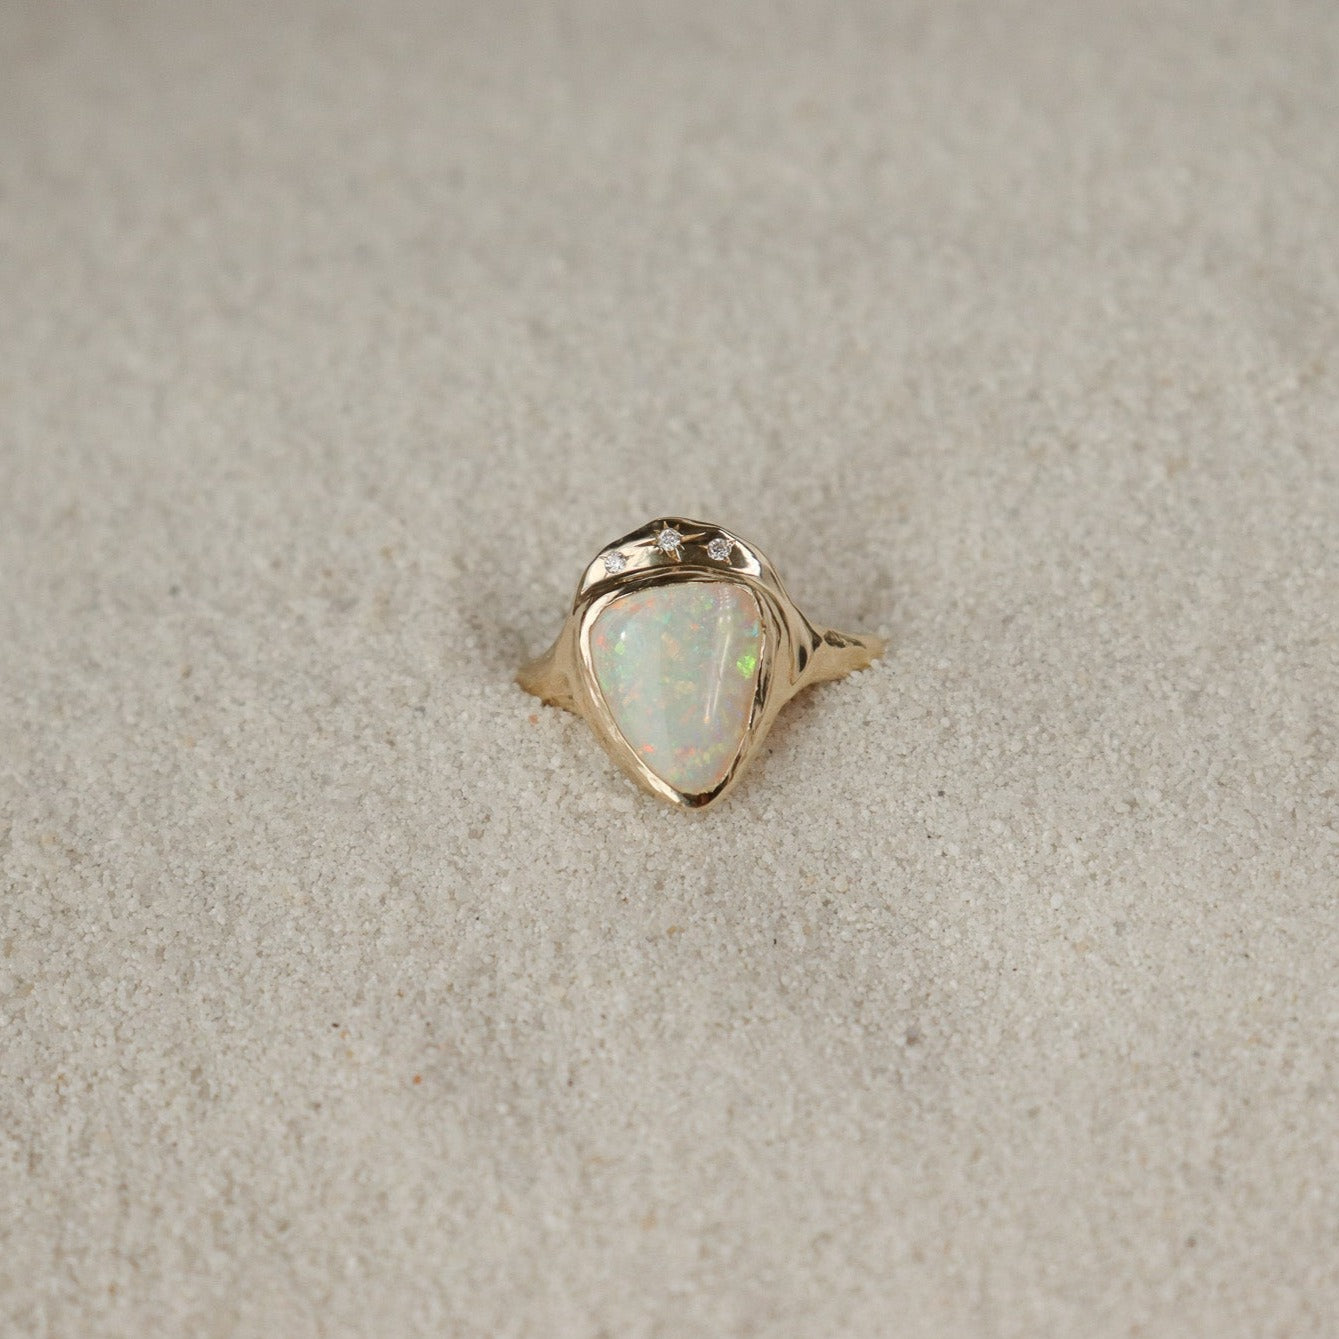 White triangle opal is bezel set in 14k gold with three star set diamonds.